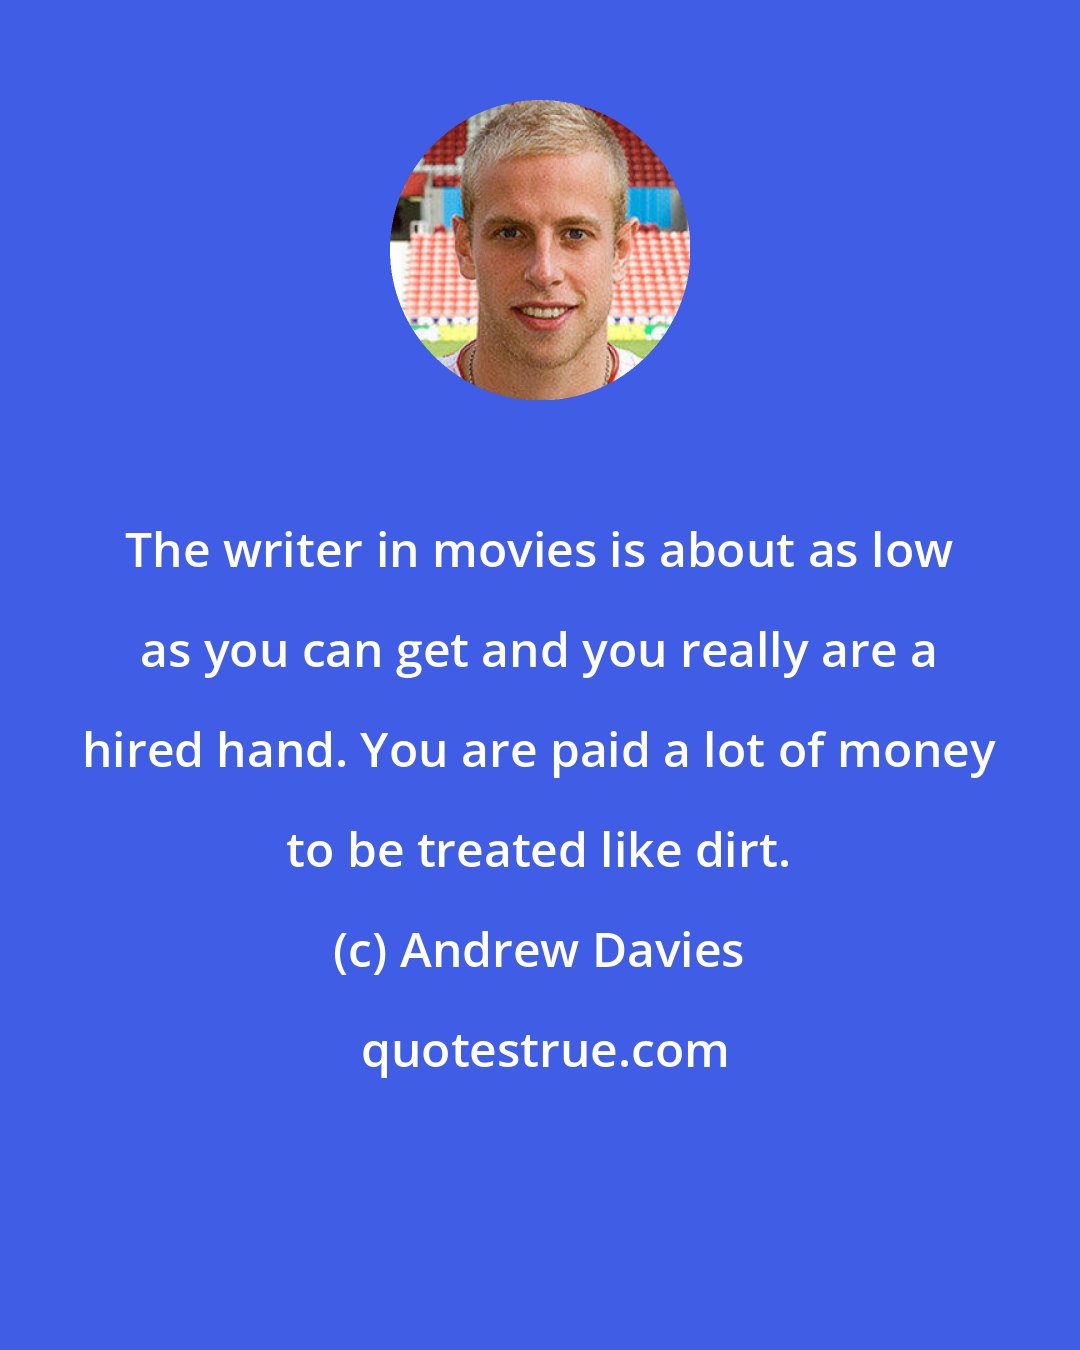 Andrew Davies: The writer in movies is about as low as you can get and you really are a hired hand. You are paid a lot of money to be treated like dirt.